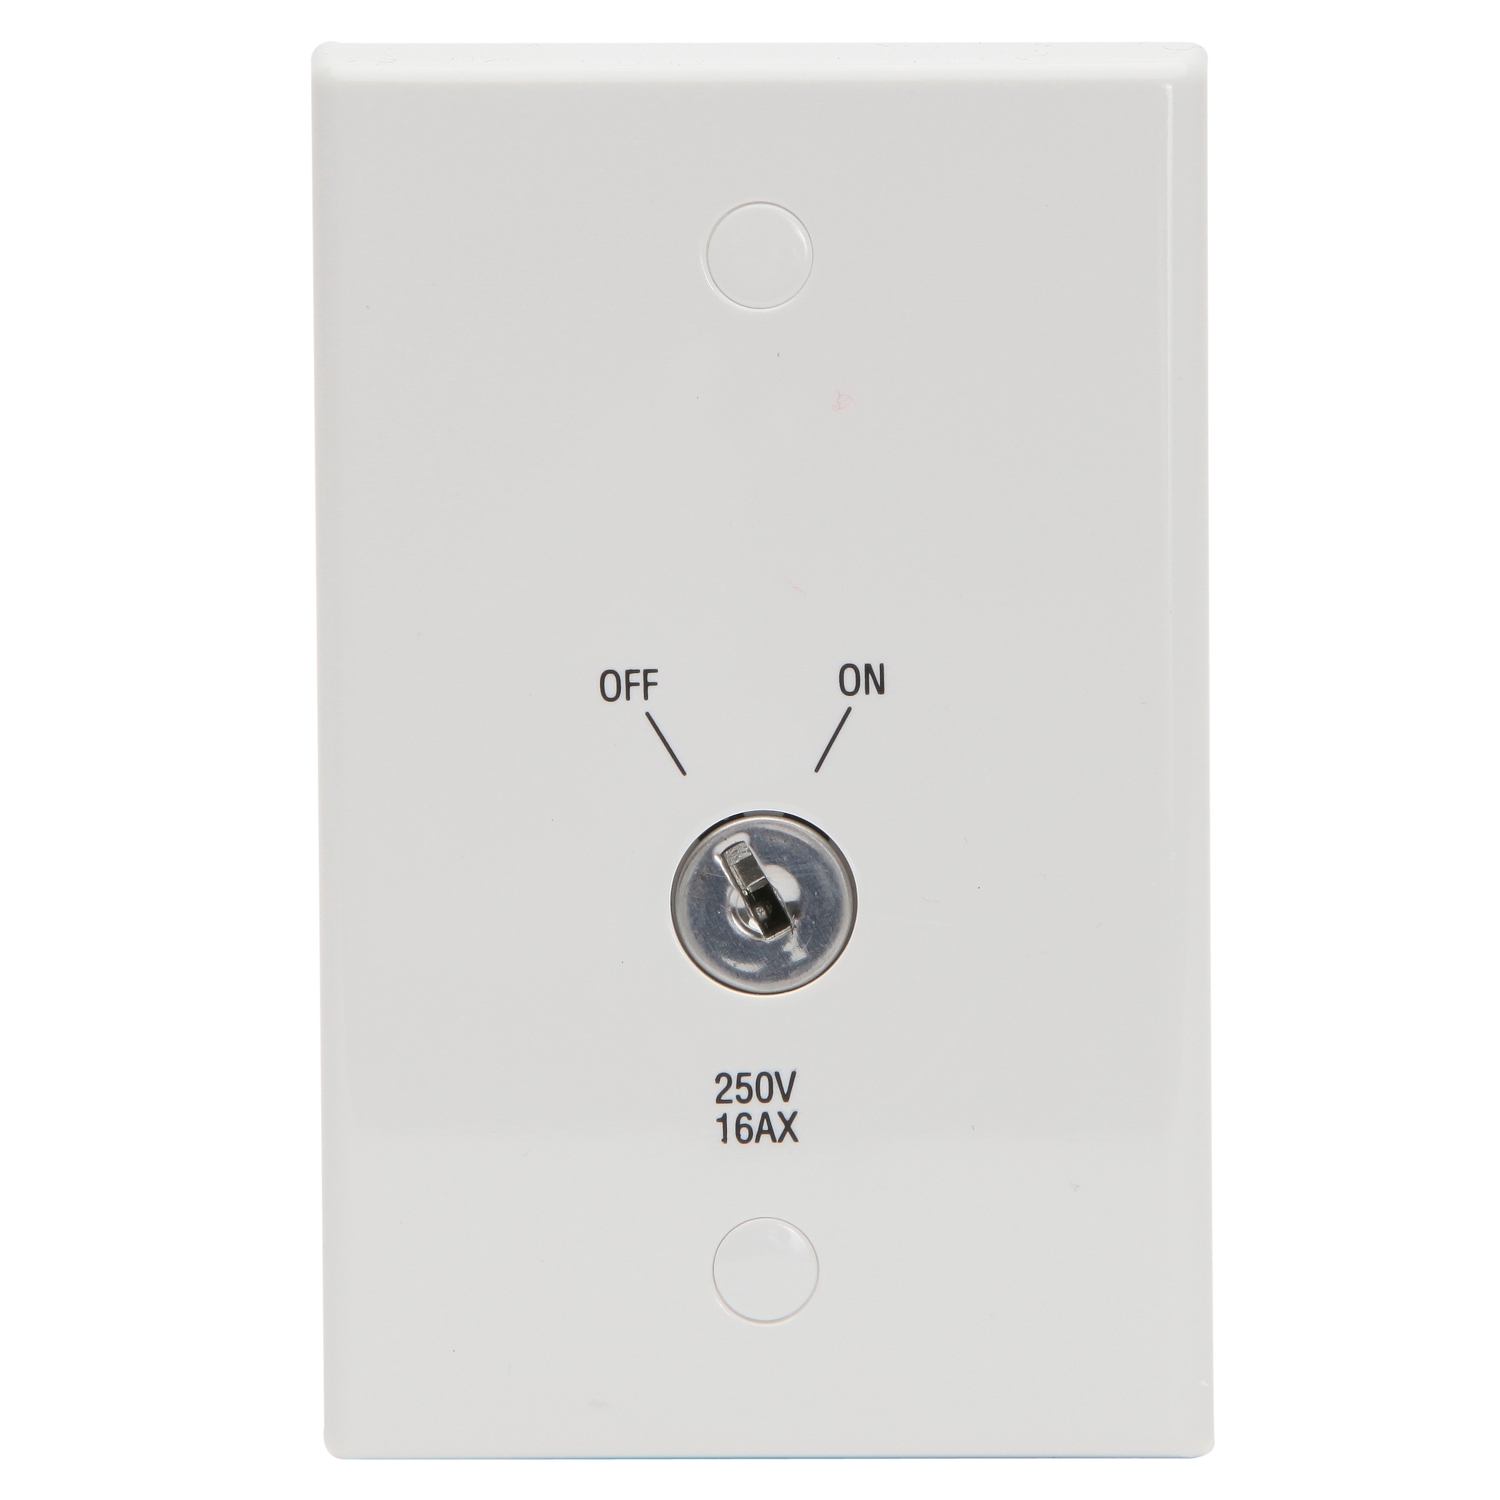 PDL - Keylock Switch Lockable 2-Way ON/OFF 16A 250V - White